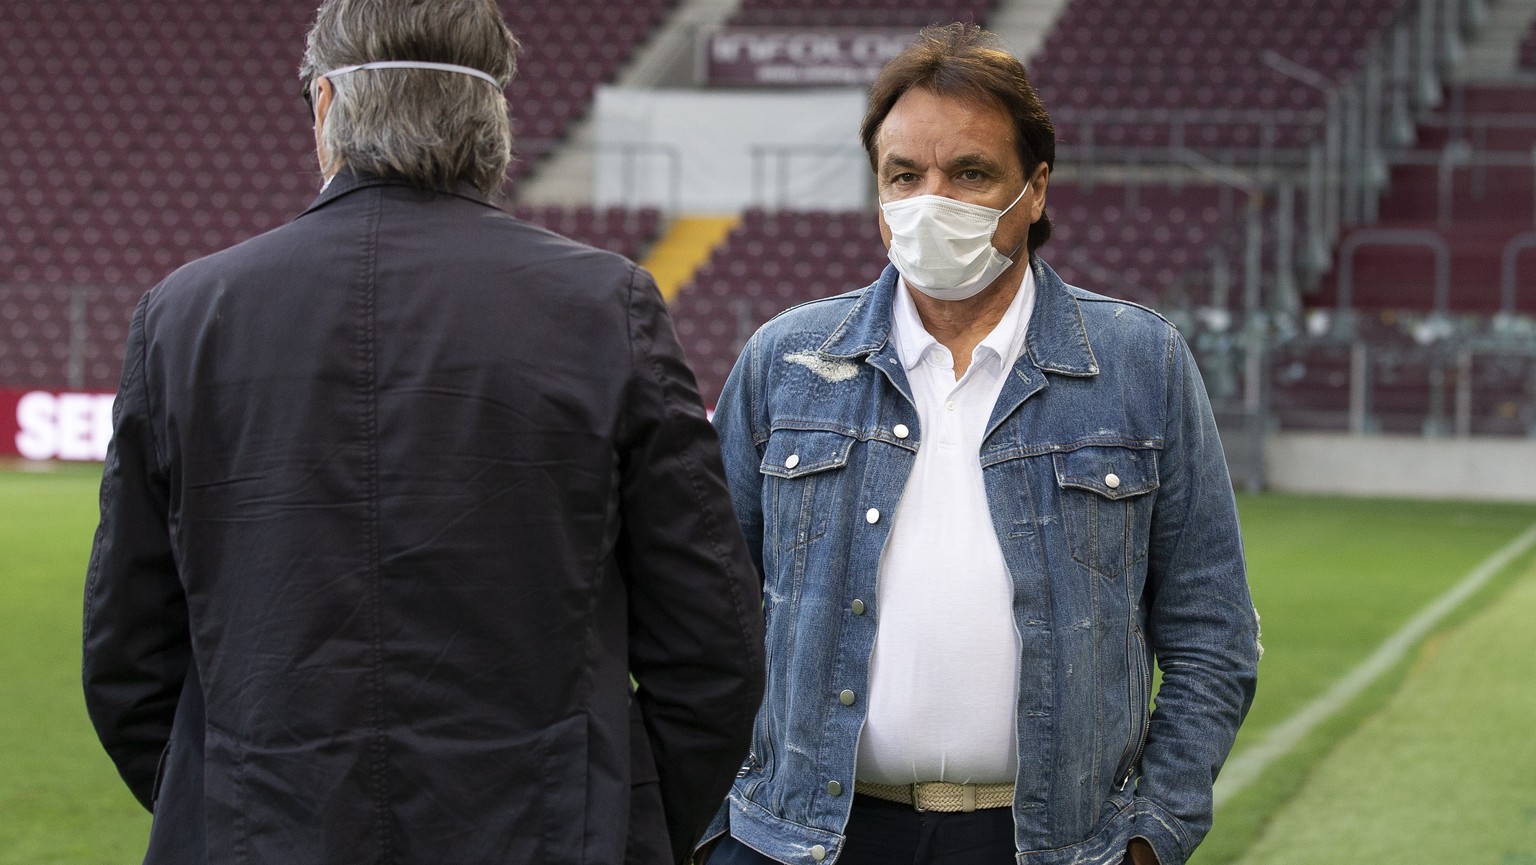 Christian Constantin, President of FC Sion, wearing face mask as precaution against the spread of the coronavirus COVID-19 waits, prior the Super League soccer match of Swiss Championship between Serv ...